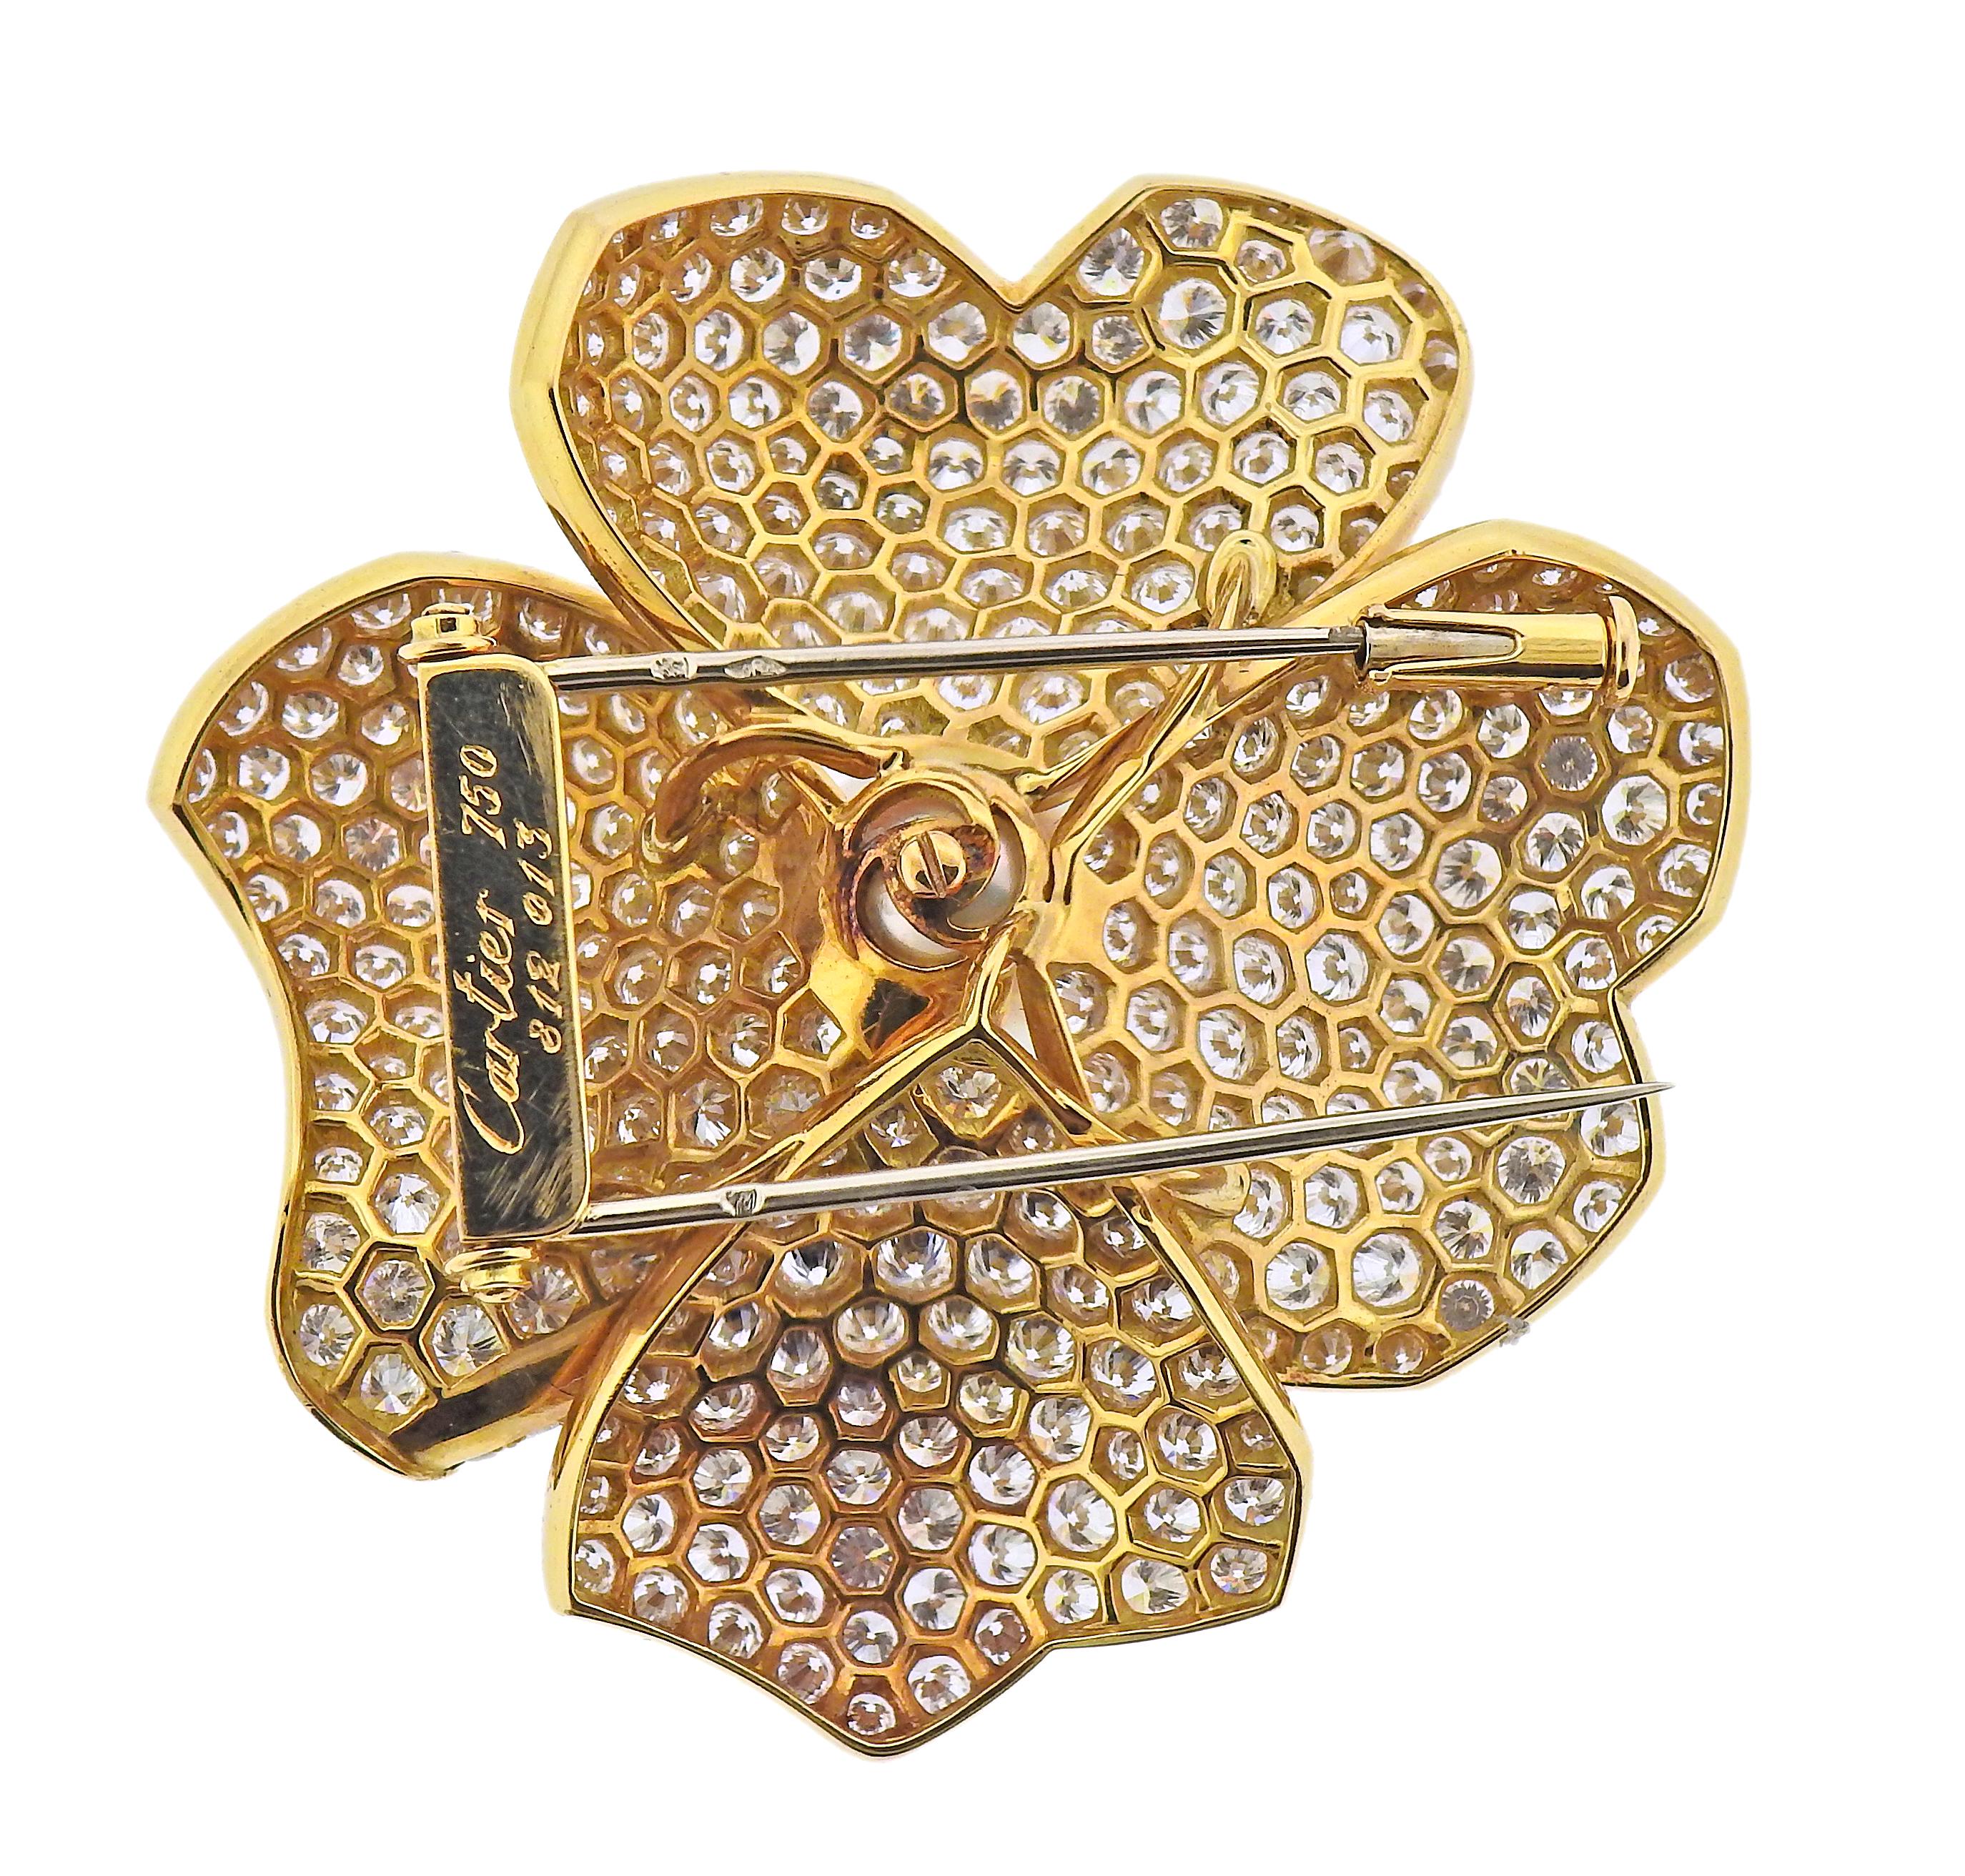 Impressive 18k gold flower brooch by Cartier, set with approx. 15 carats in diamonds and a 10mm South Sea pearl. Brooch measures 46mm x 45mm. Marked: Cartier, 750, 812 013. Weight - 23.1 grams.